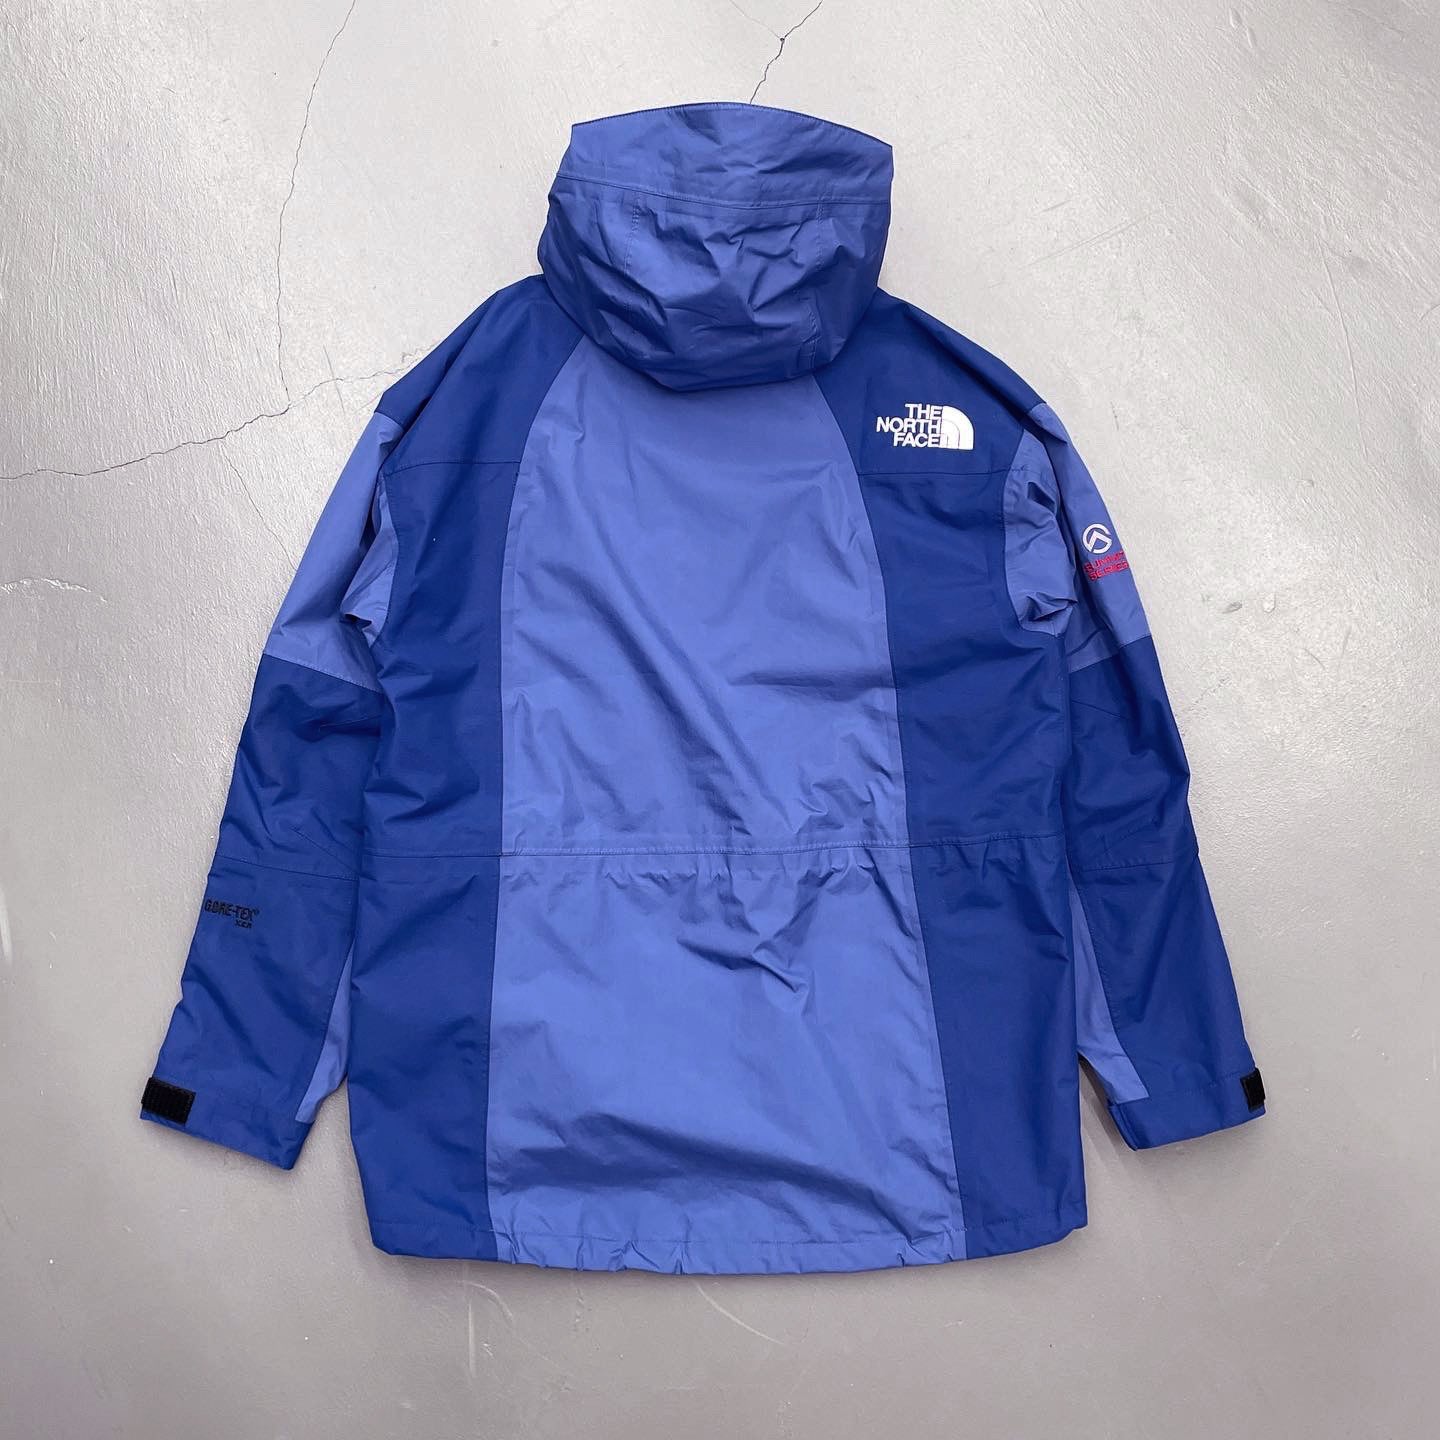 The North Face Vintage GORE-TEX Mountain Jacket